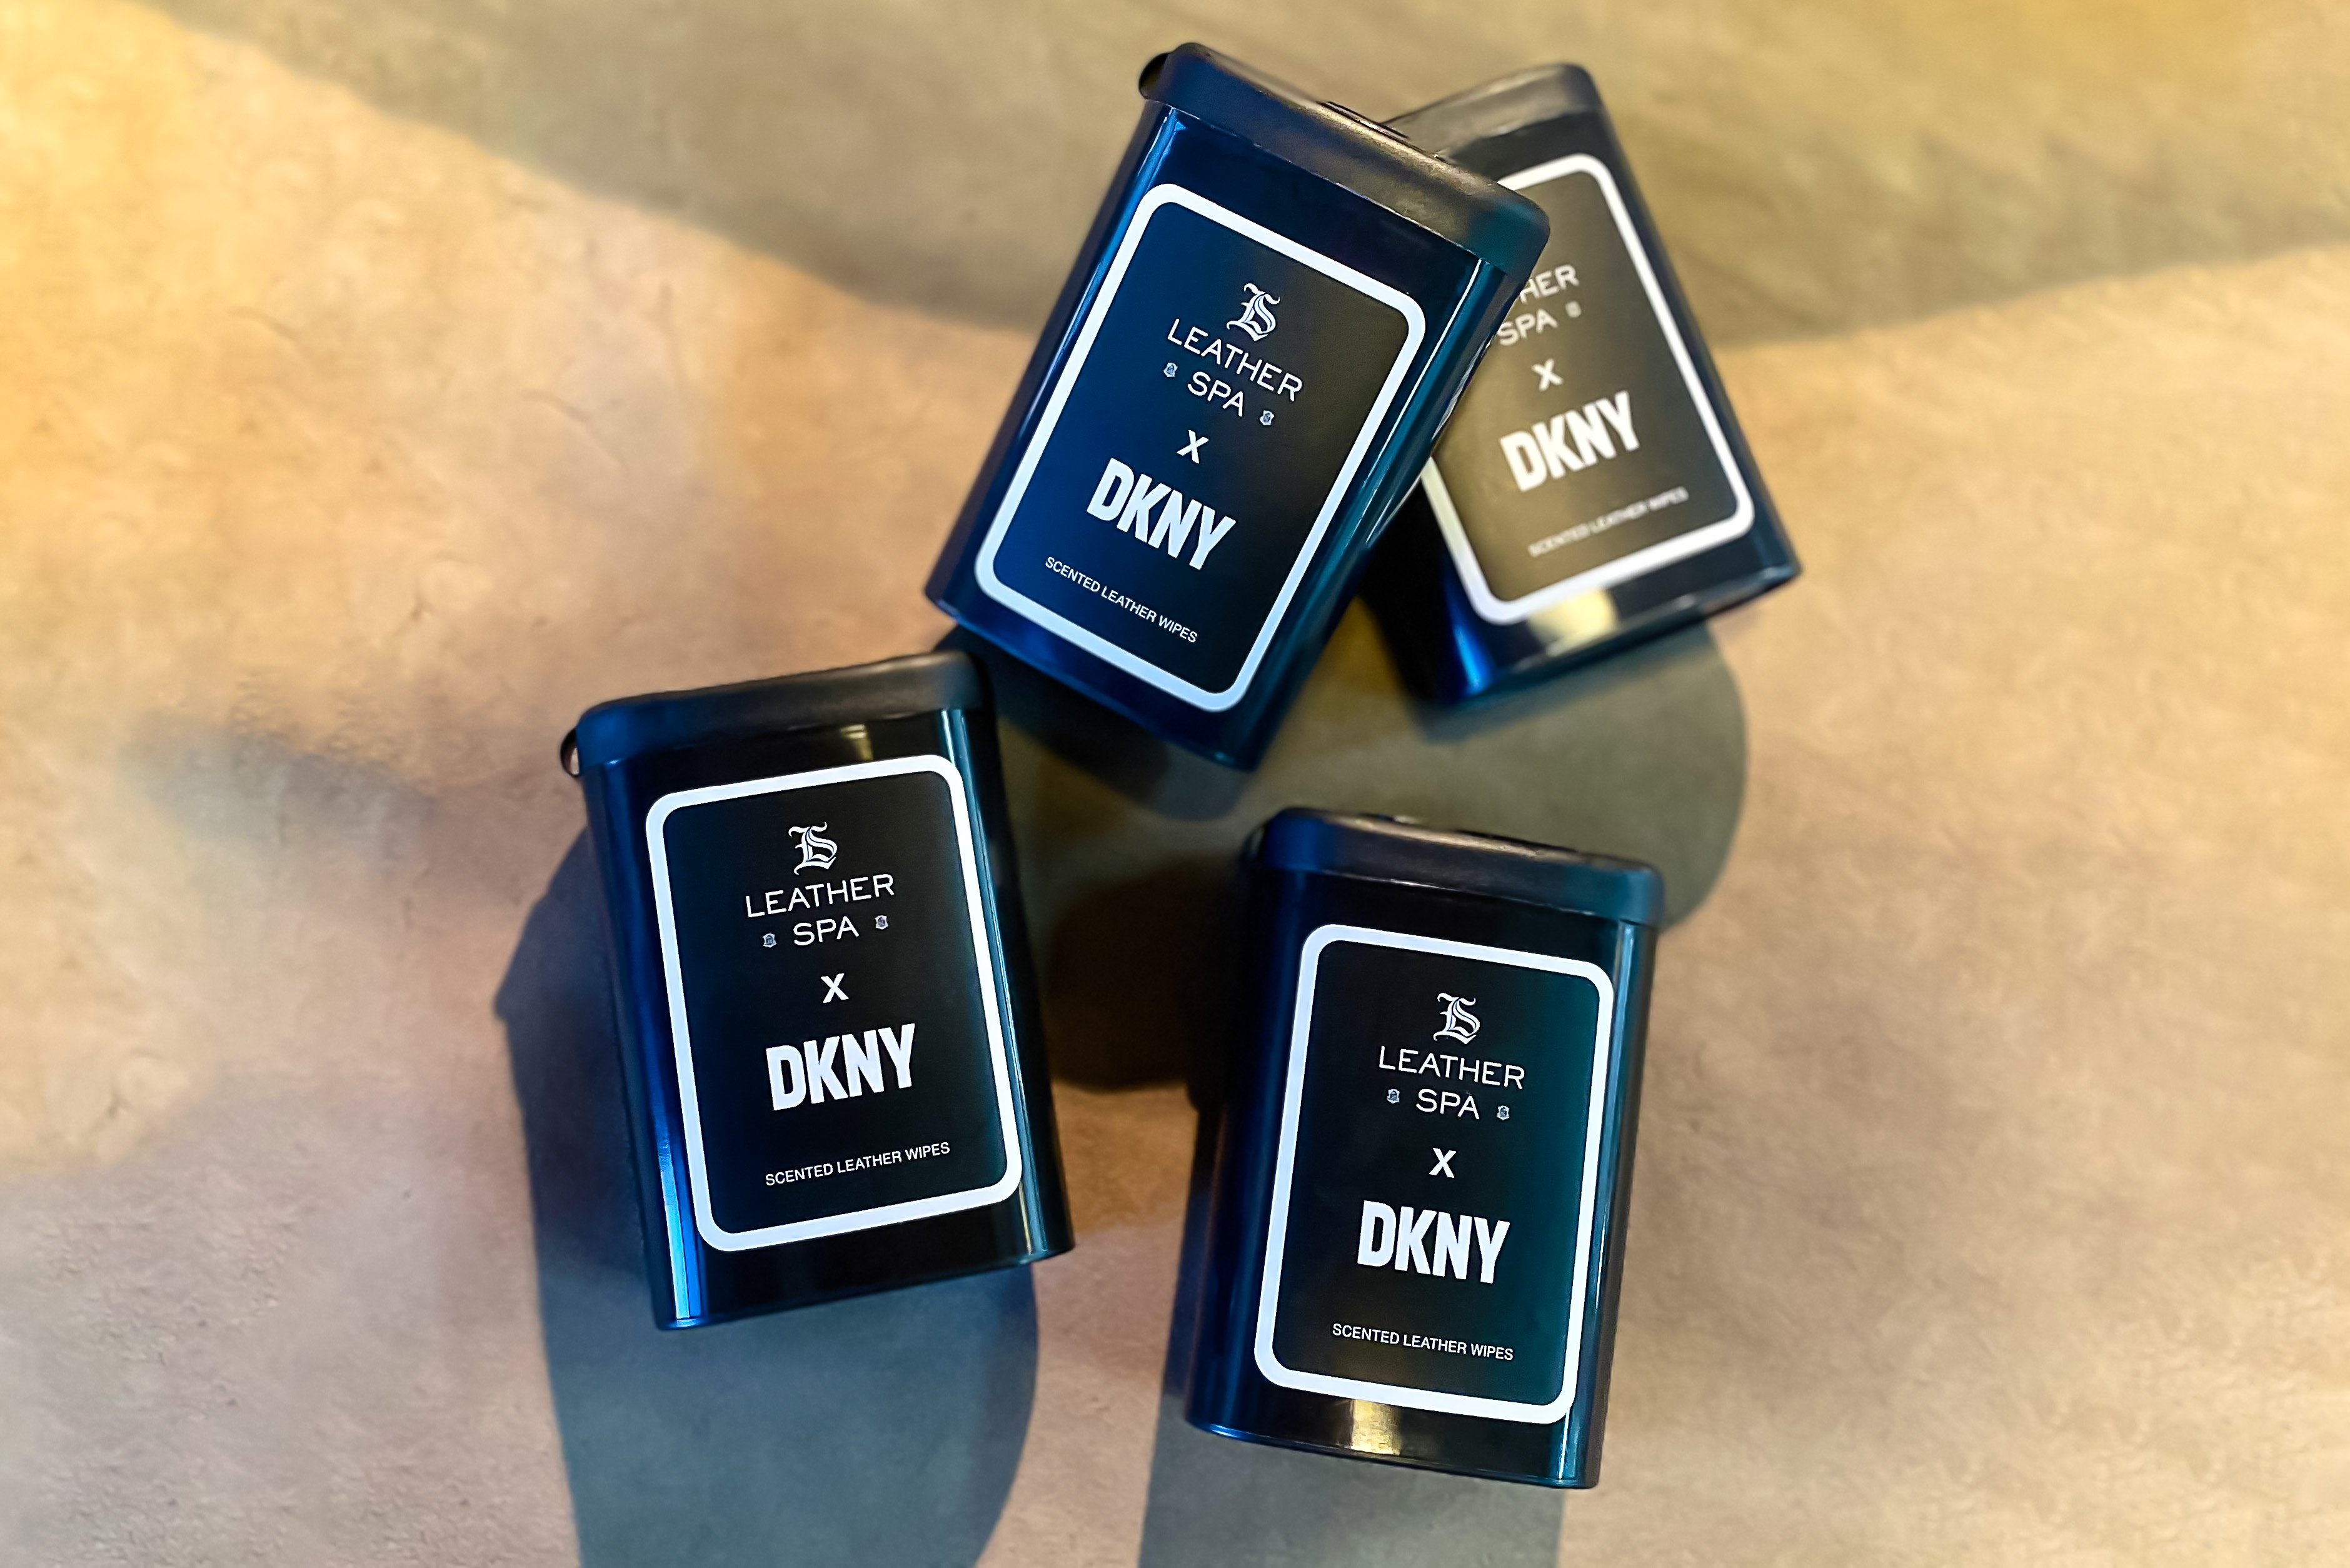 Leather Spa and DKNY products samples picture